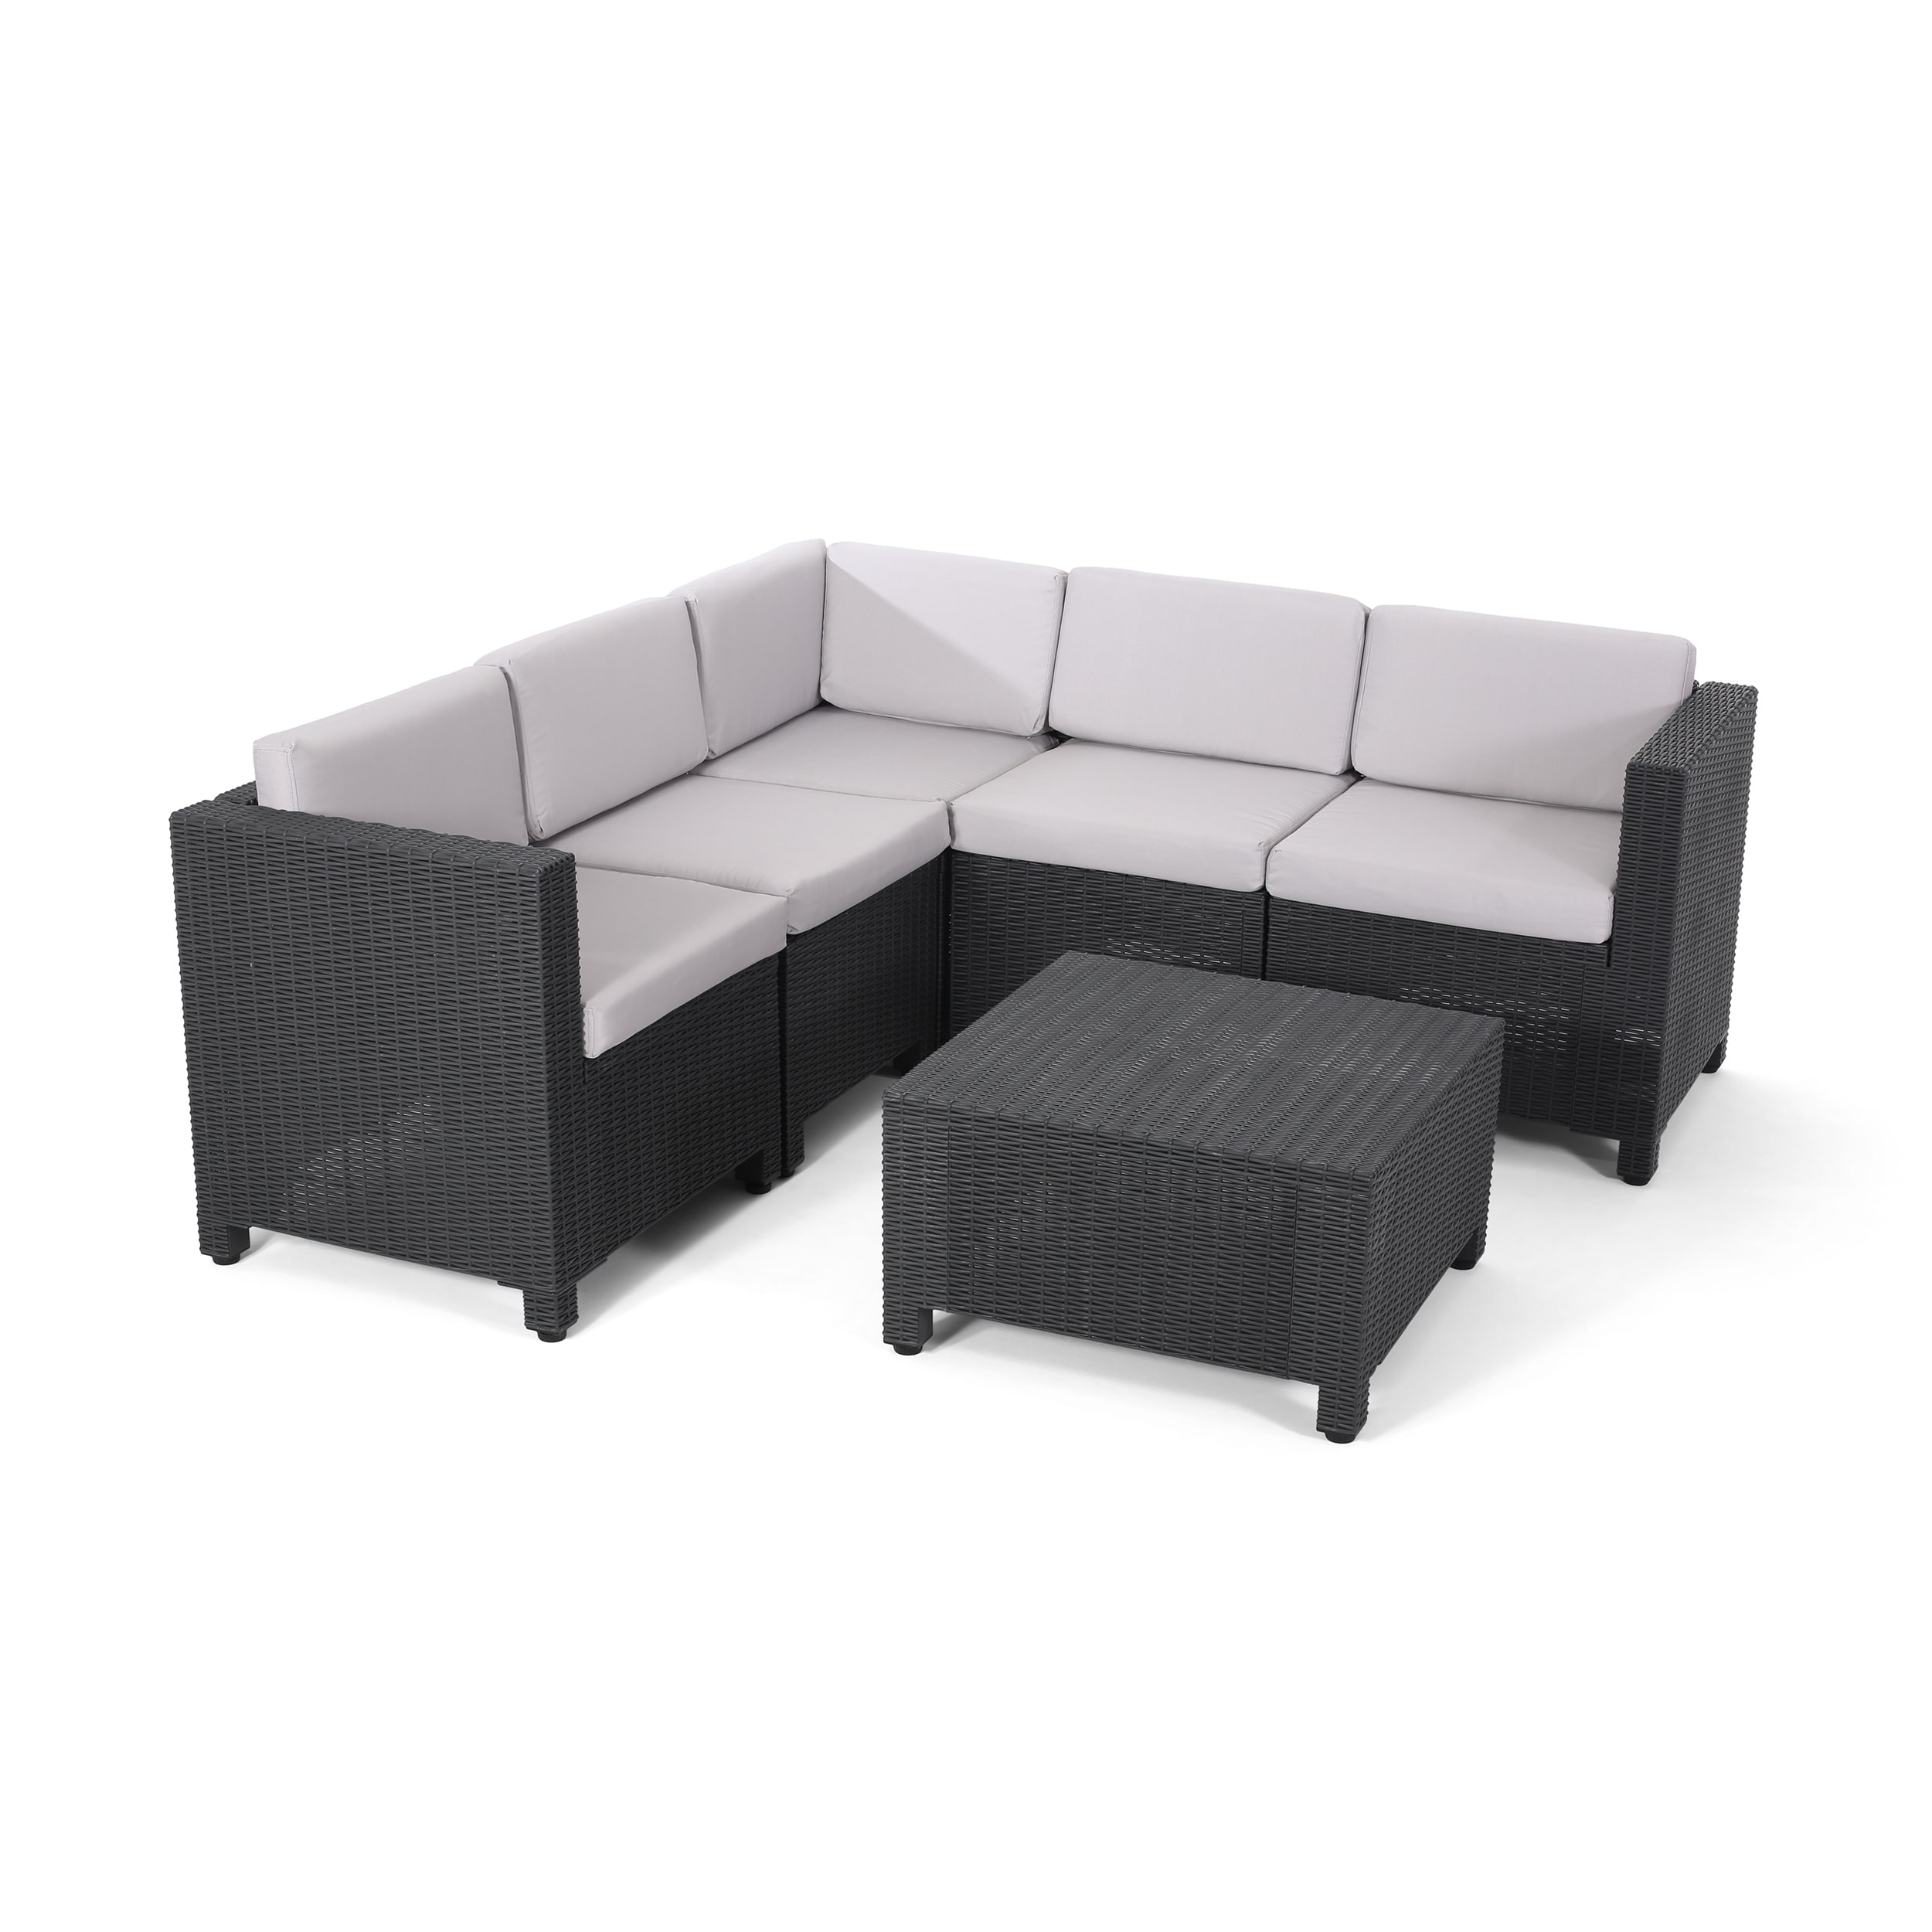 Waverly Outdoor All Weather Faux Wicker 5 Seater Sectional Sofa Set With Cushions By Christopher Knight Home